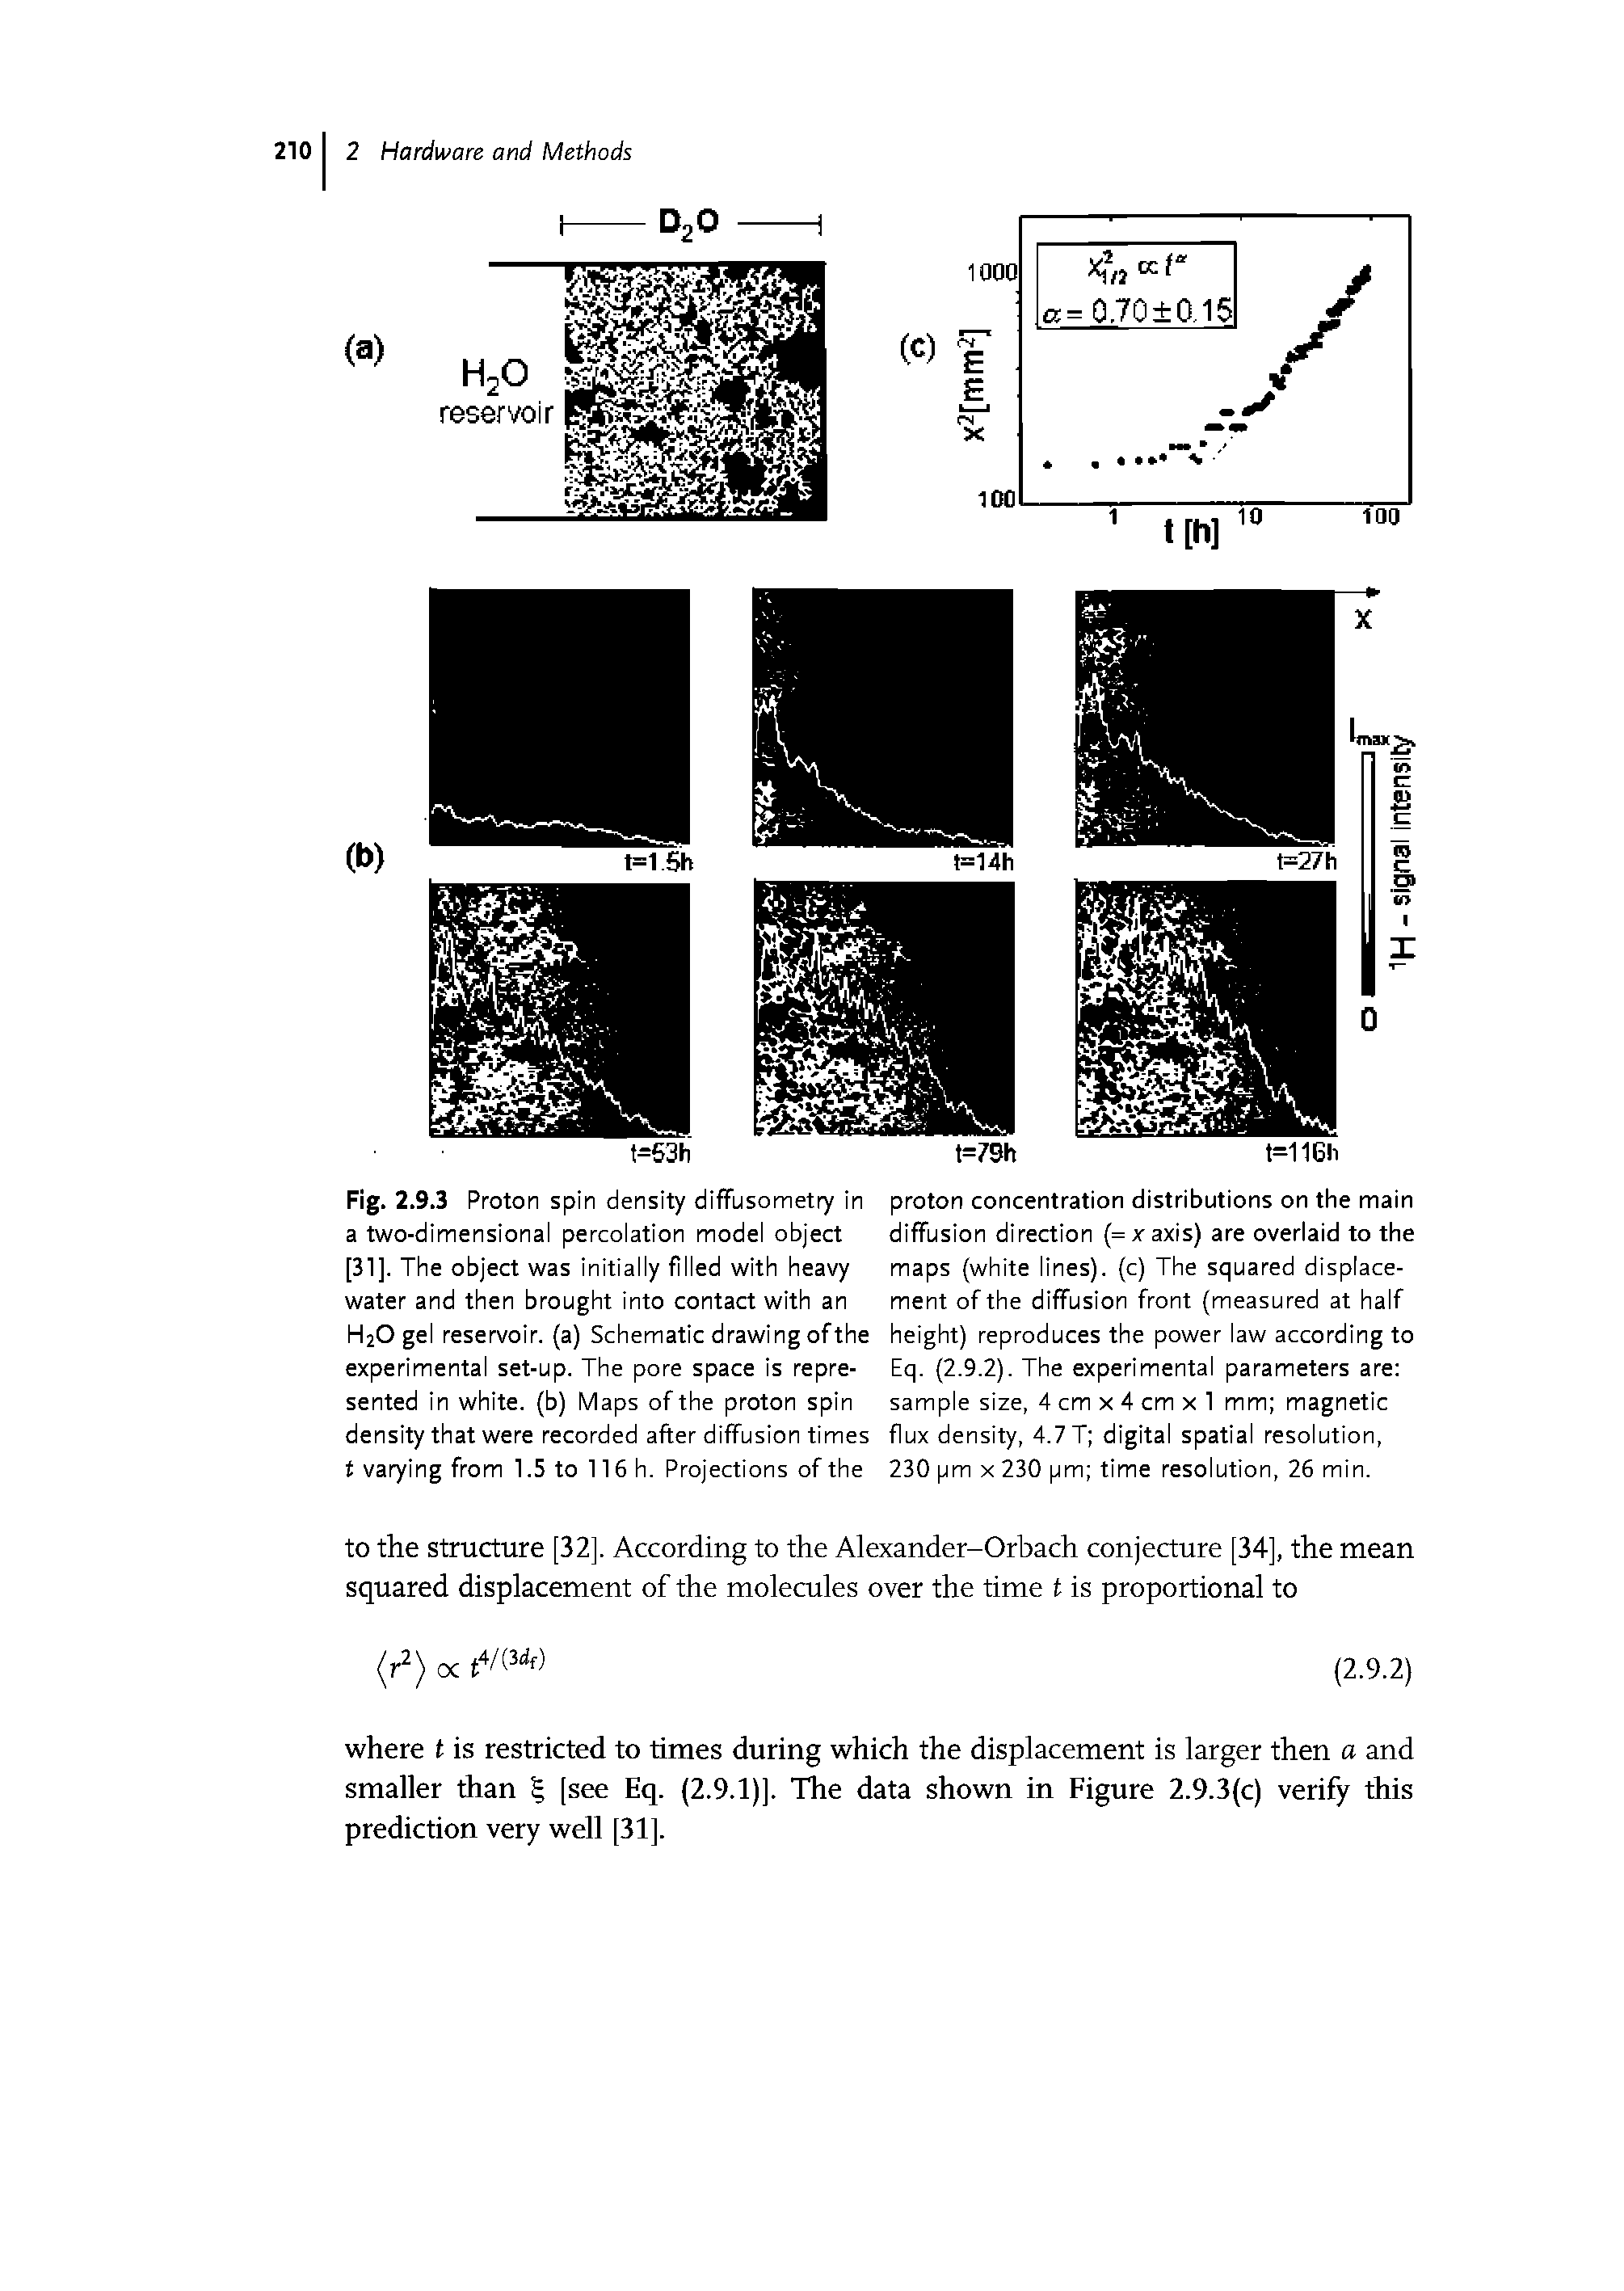 Fig. 2.9.3 Proton spin density diffusometry in a two-dimensional percolation model object [31]. The object was initially filled with heavy water and then brought into contact with an H2O gel reservoir, (a) Schematic drawing ofthe experimental set-up. The pore space is represented in white, (b) Maps ofthe proton spin density that were recorded after diffusion times t varying from 1.5 to 116 h. Projections of the...